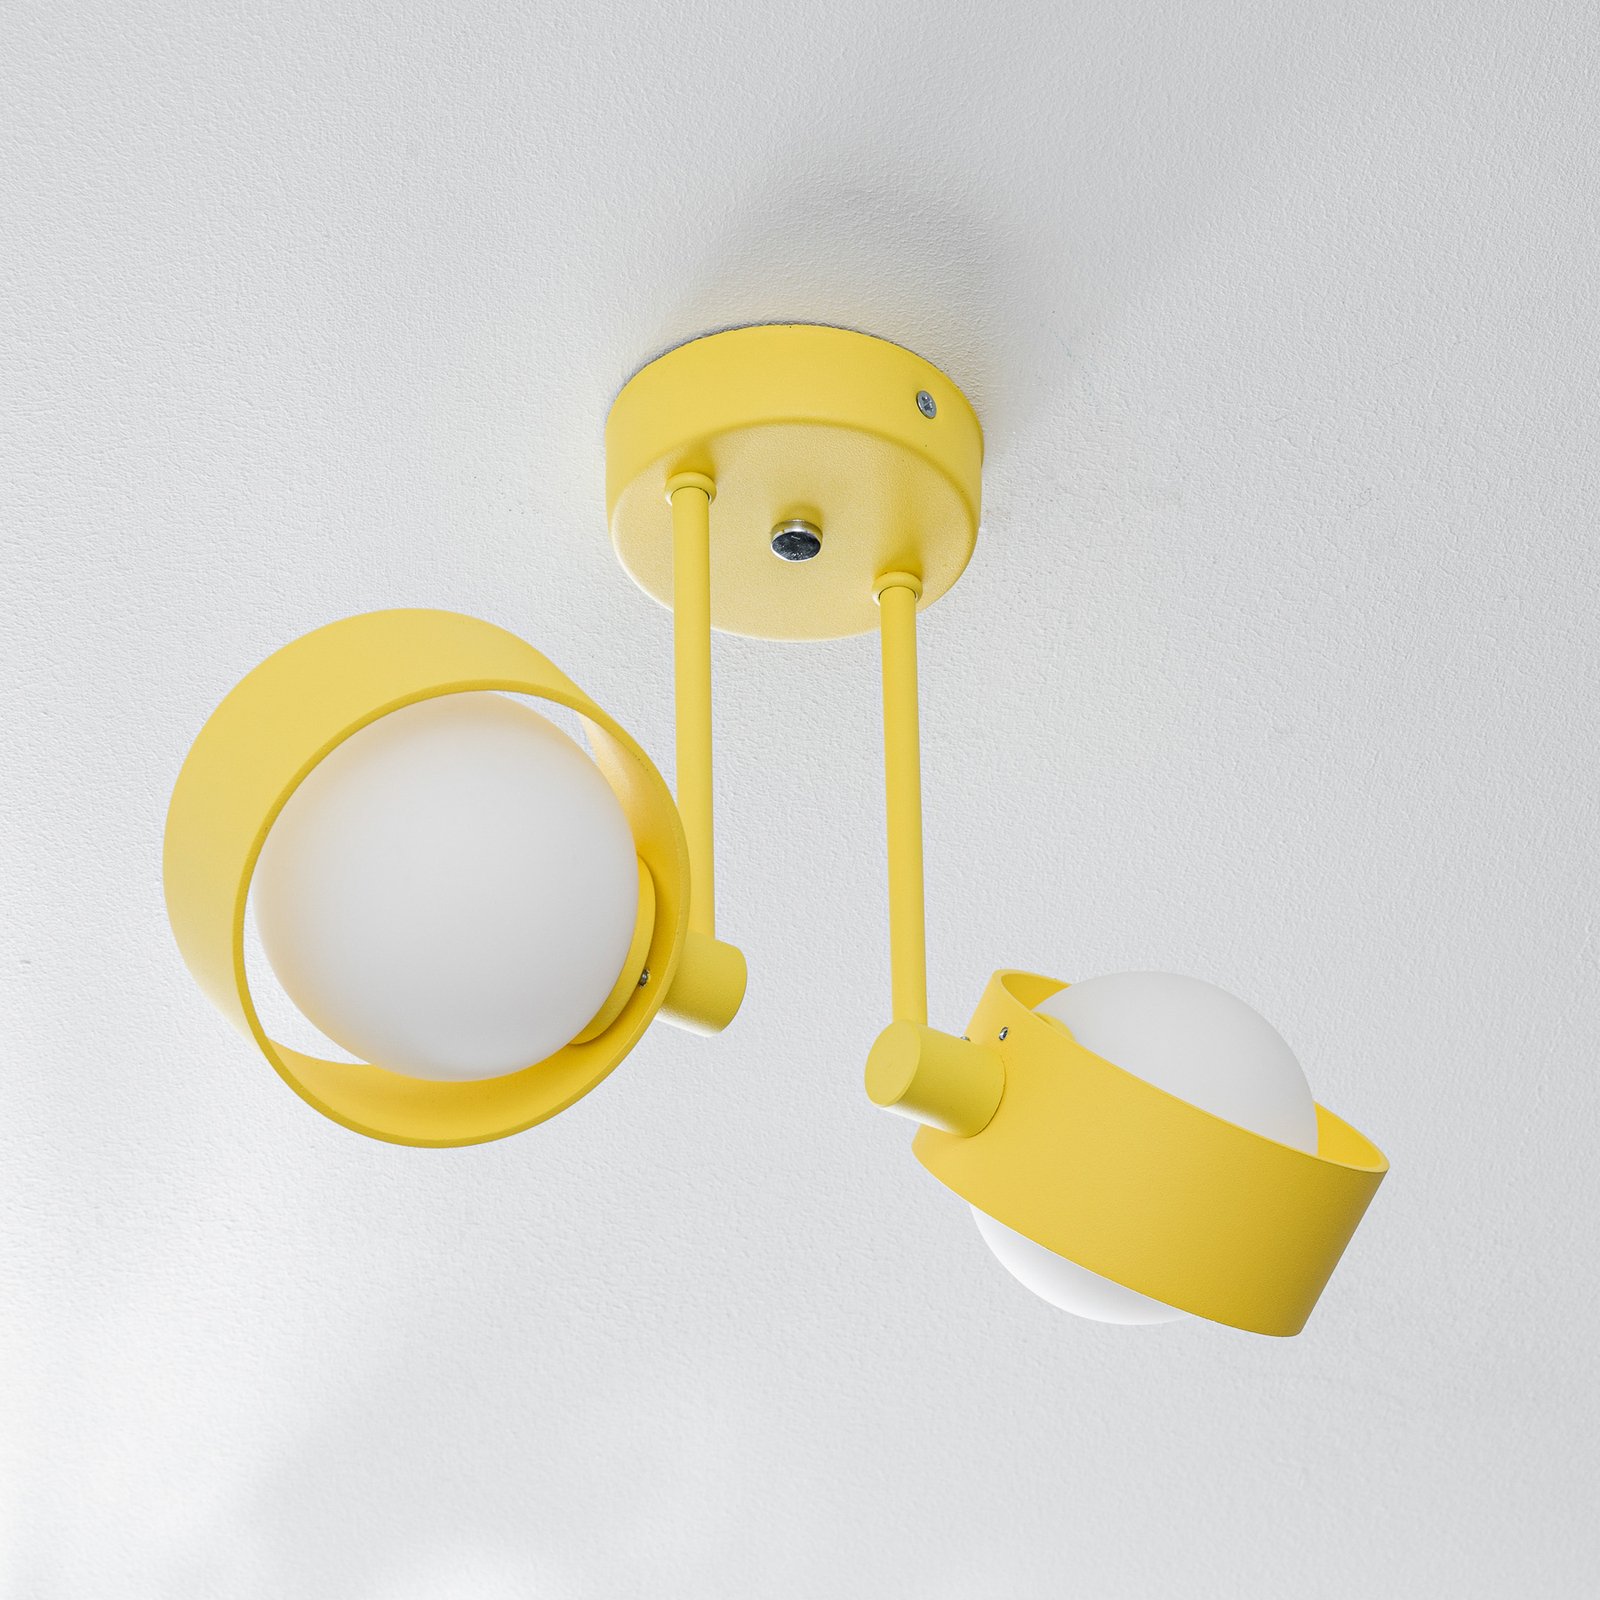 Mado ceiling light, steel, yellow, two-bulb